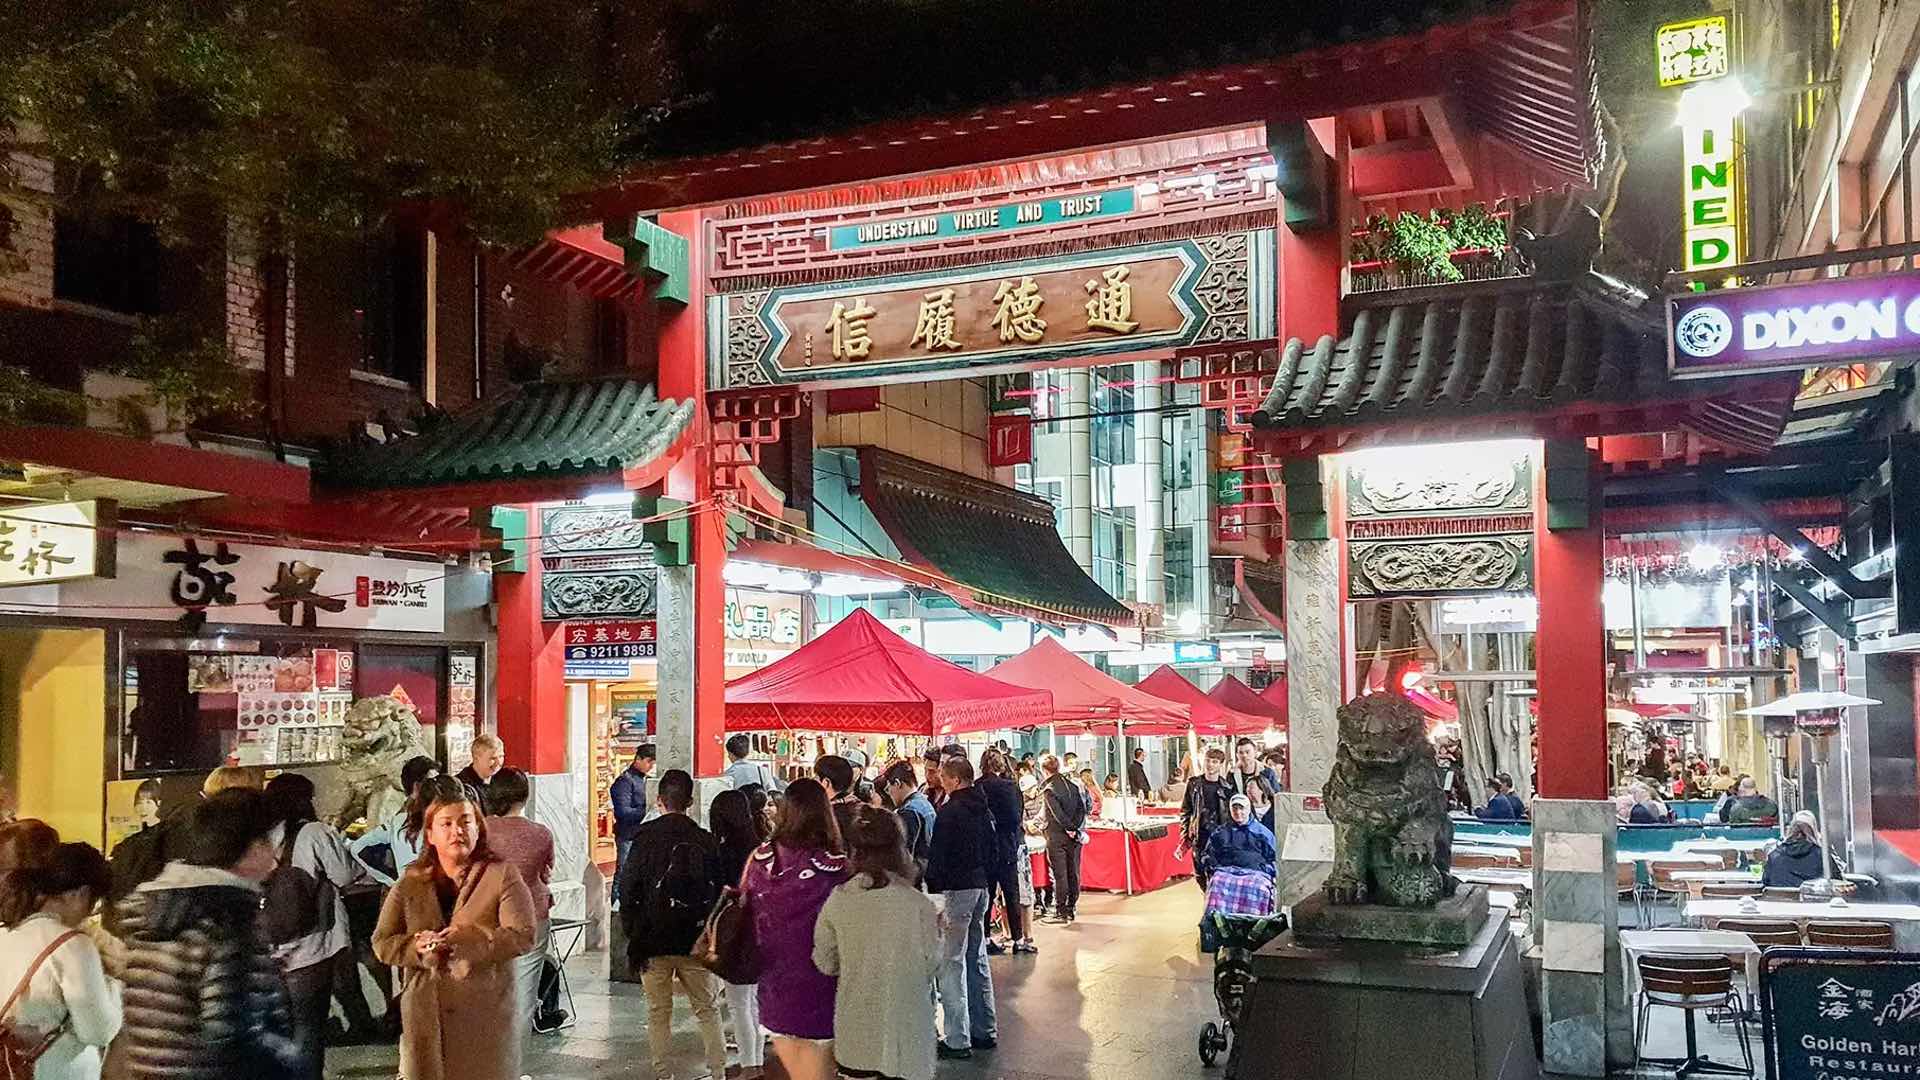 The Best Things to Do, See and Eat During Sydney Chinese New Year 2019